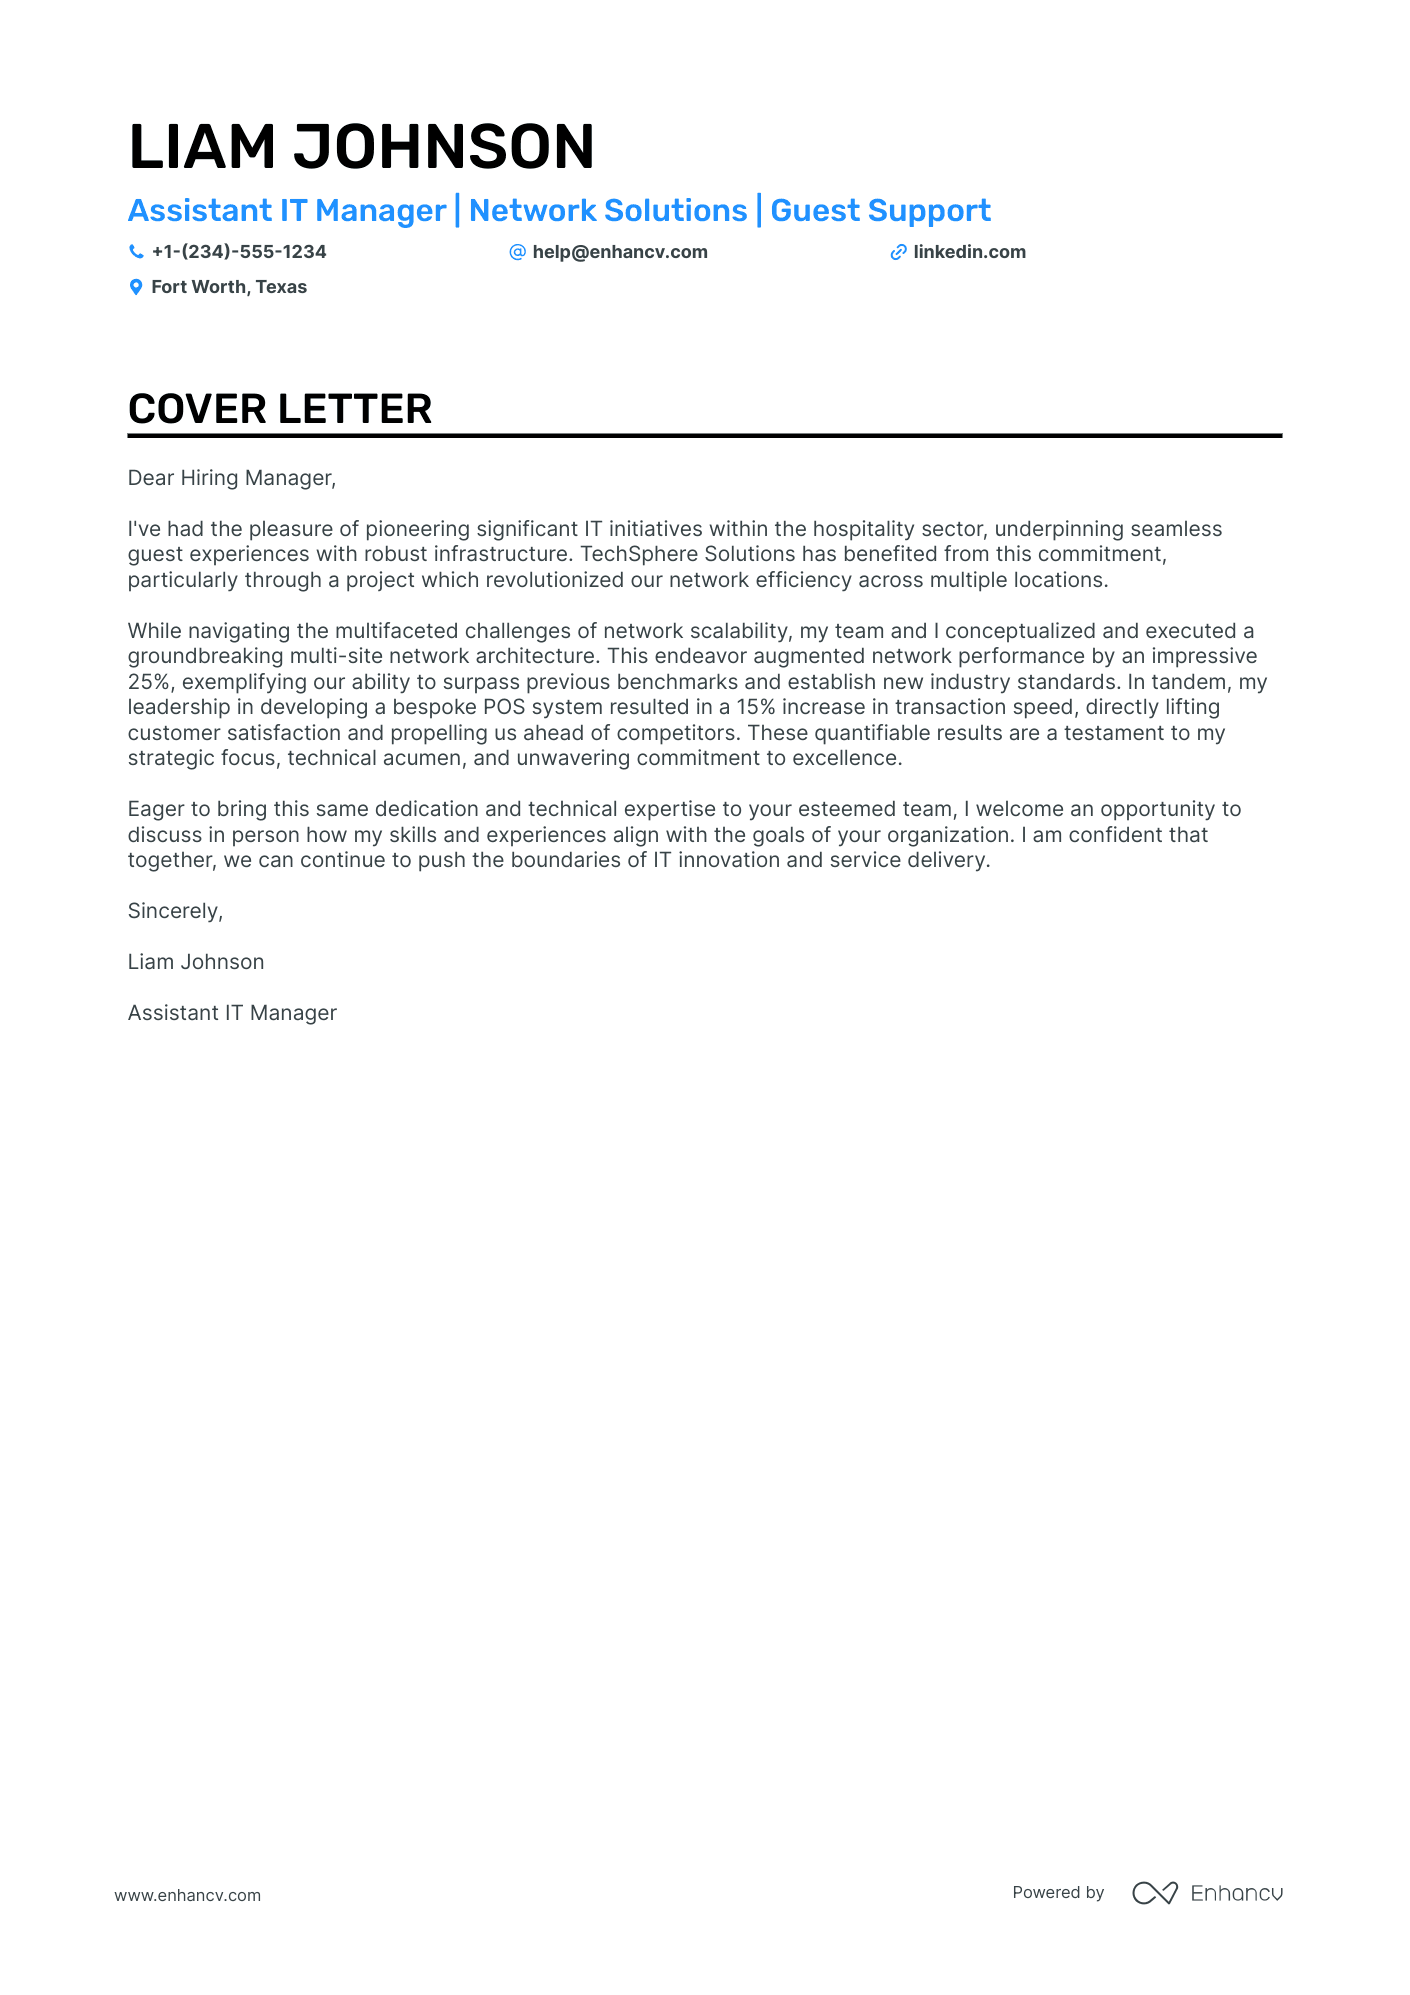 Assistant IT Manager cover letter